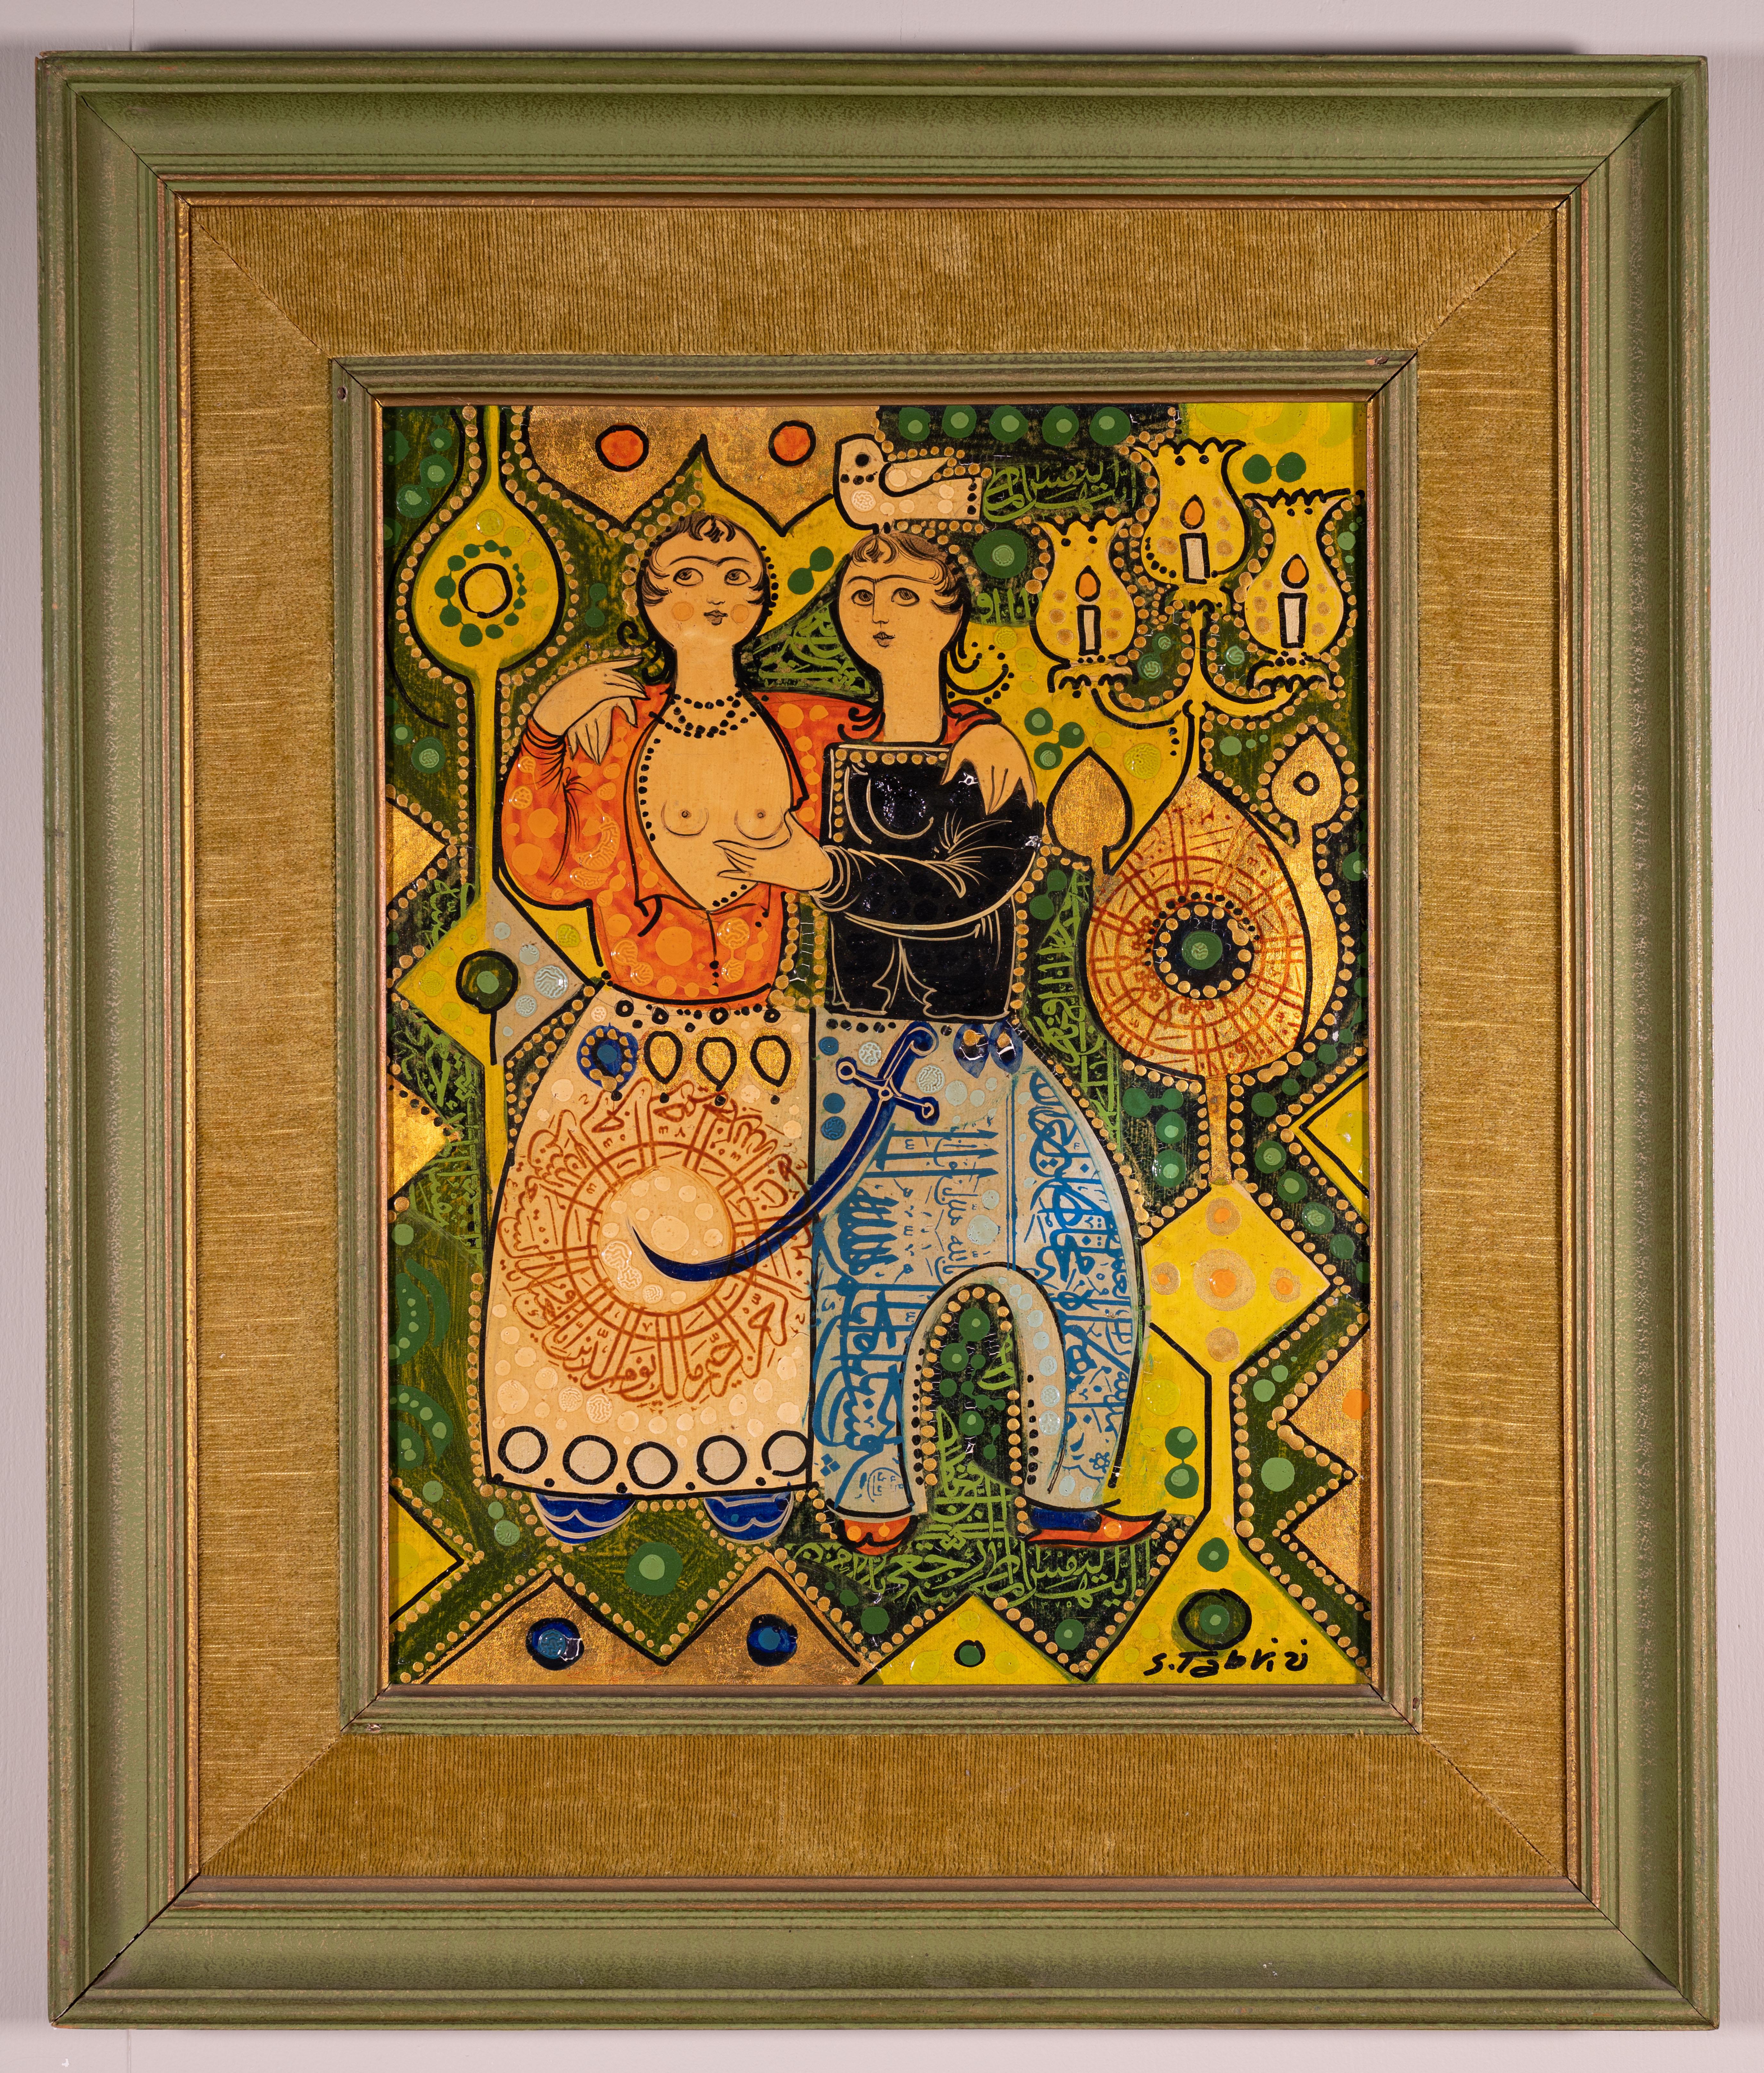 Other Framed Erotic Persian Painting of Lovers by Sadegh Tabrizi